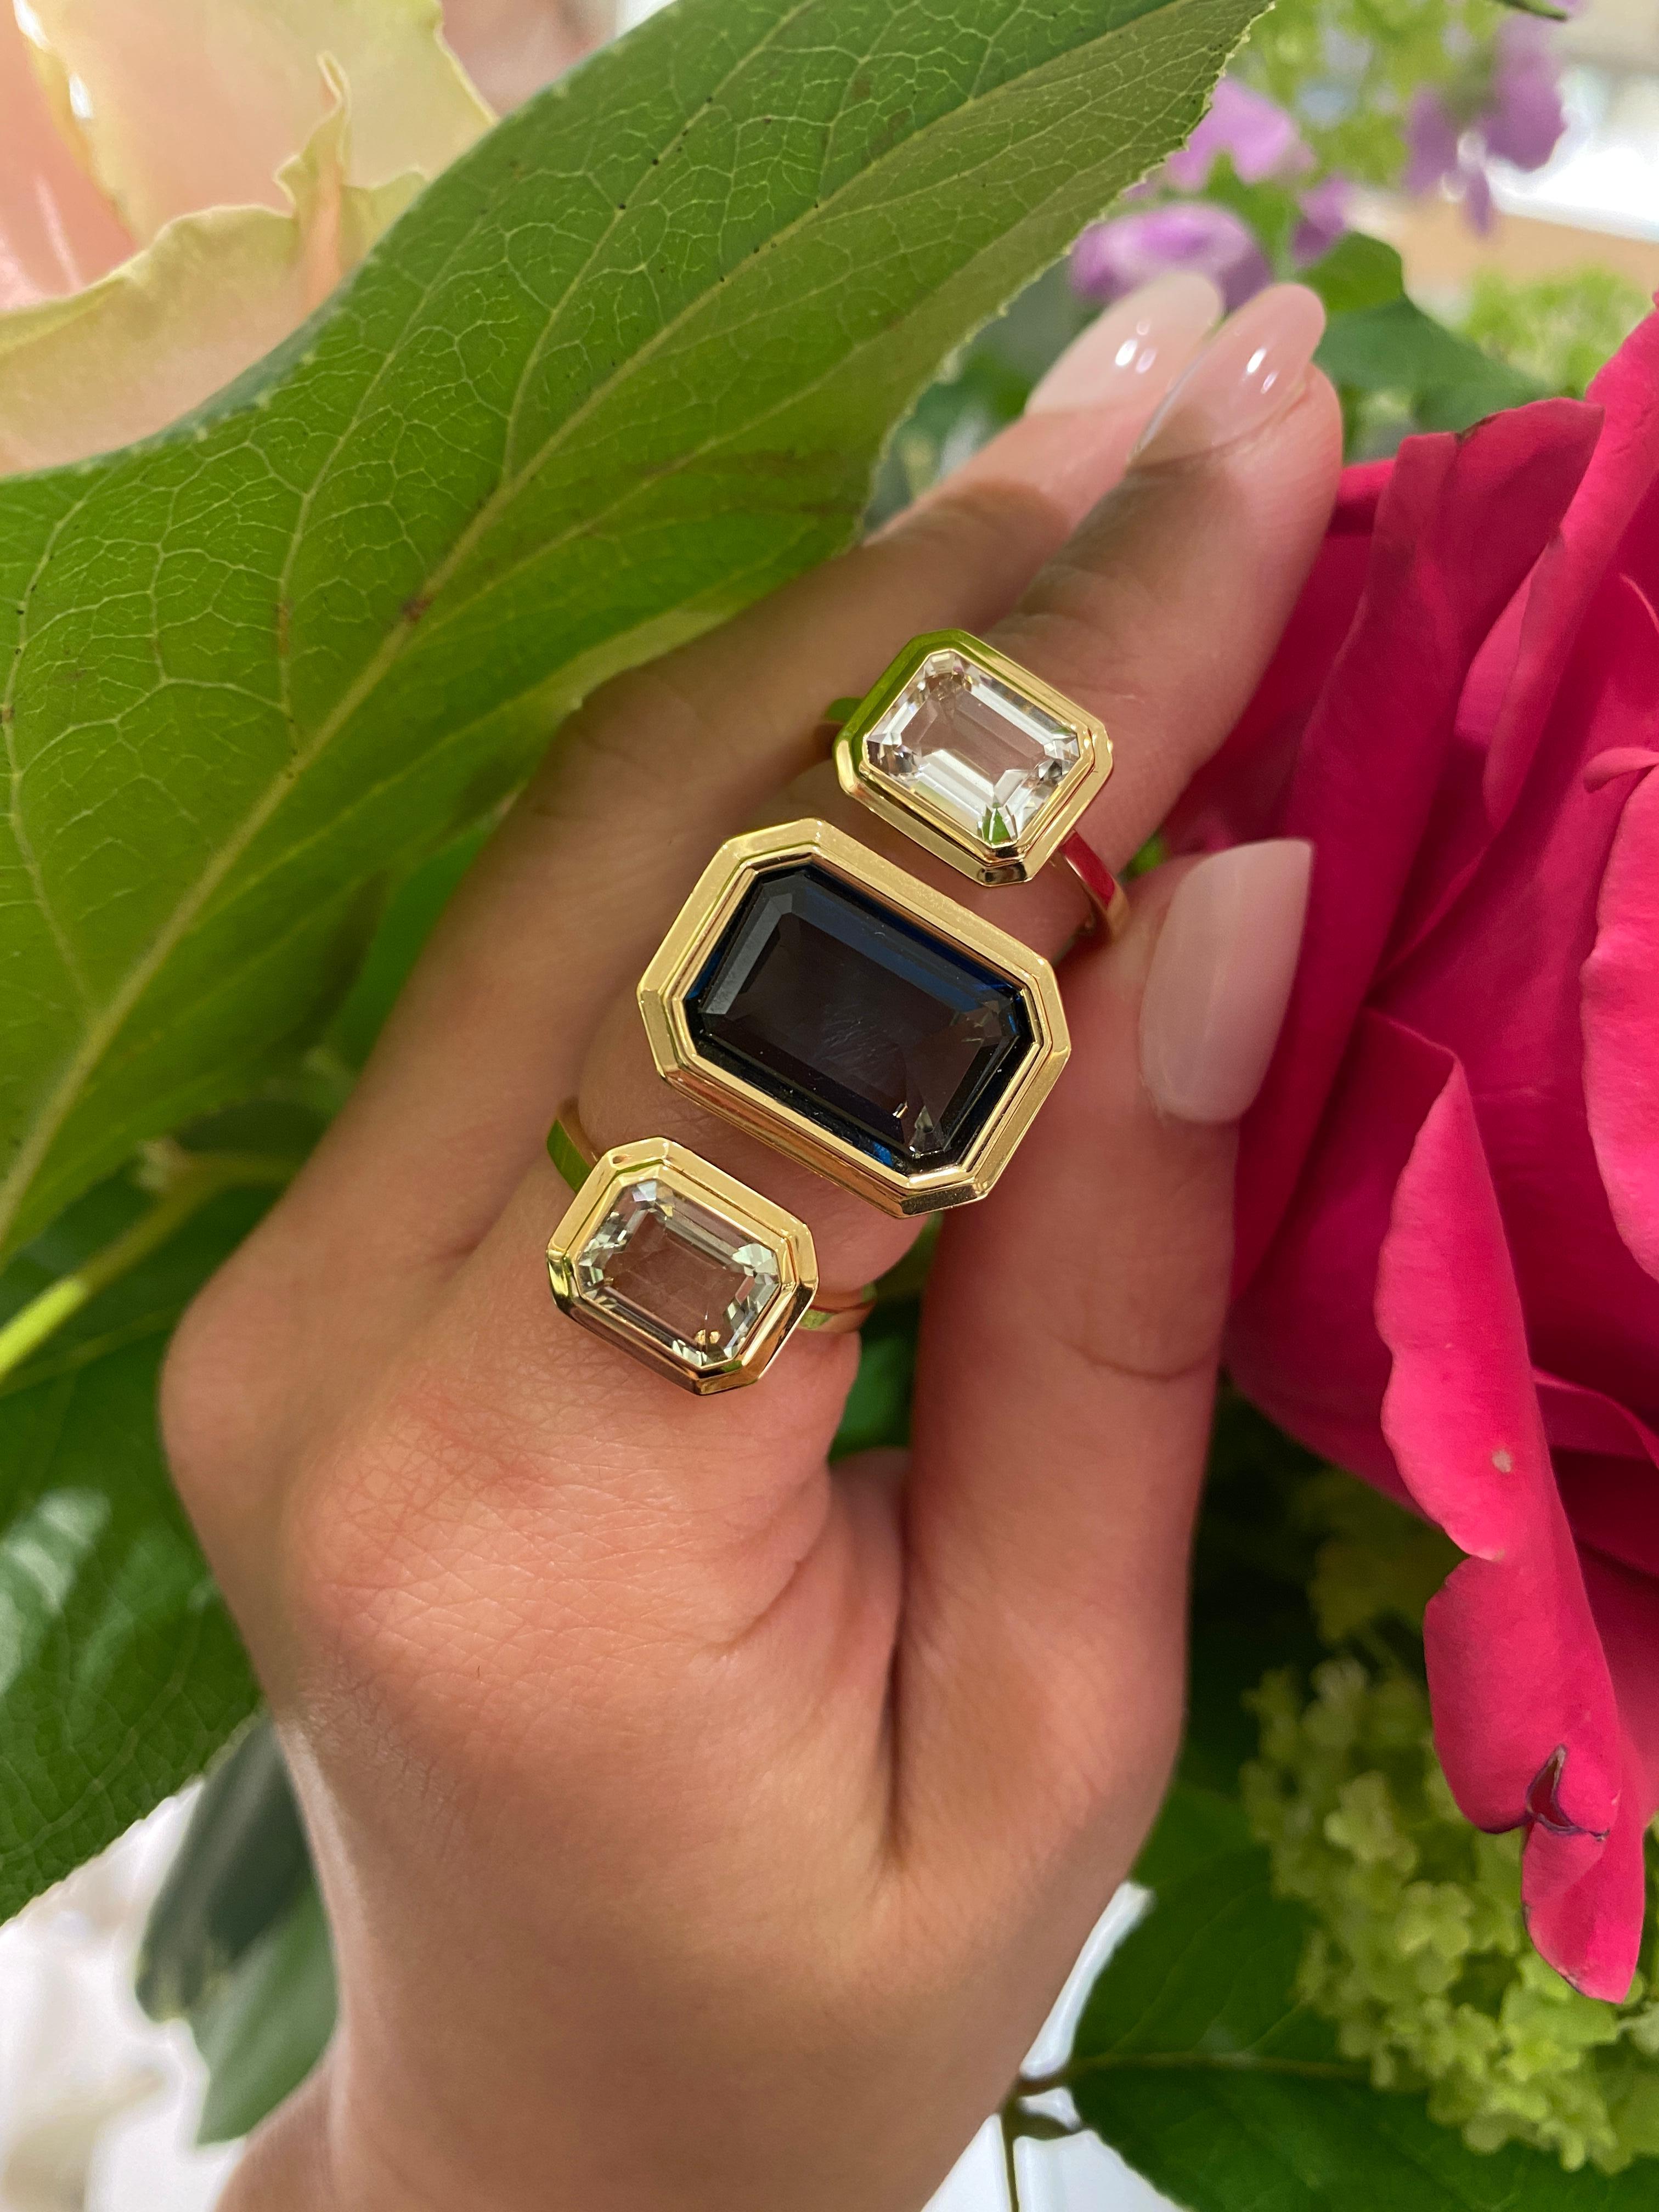 This Rock Crystal Emerald Cut Bezel Set Ring in 18K Yellow Gold is a sleek piece from the 'Manhattan' Collection. It features a stunning emerald-cut Rock Crystal stone set in a 18K yellow gold bezel. This ring embodies modern elegance, offering a